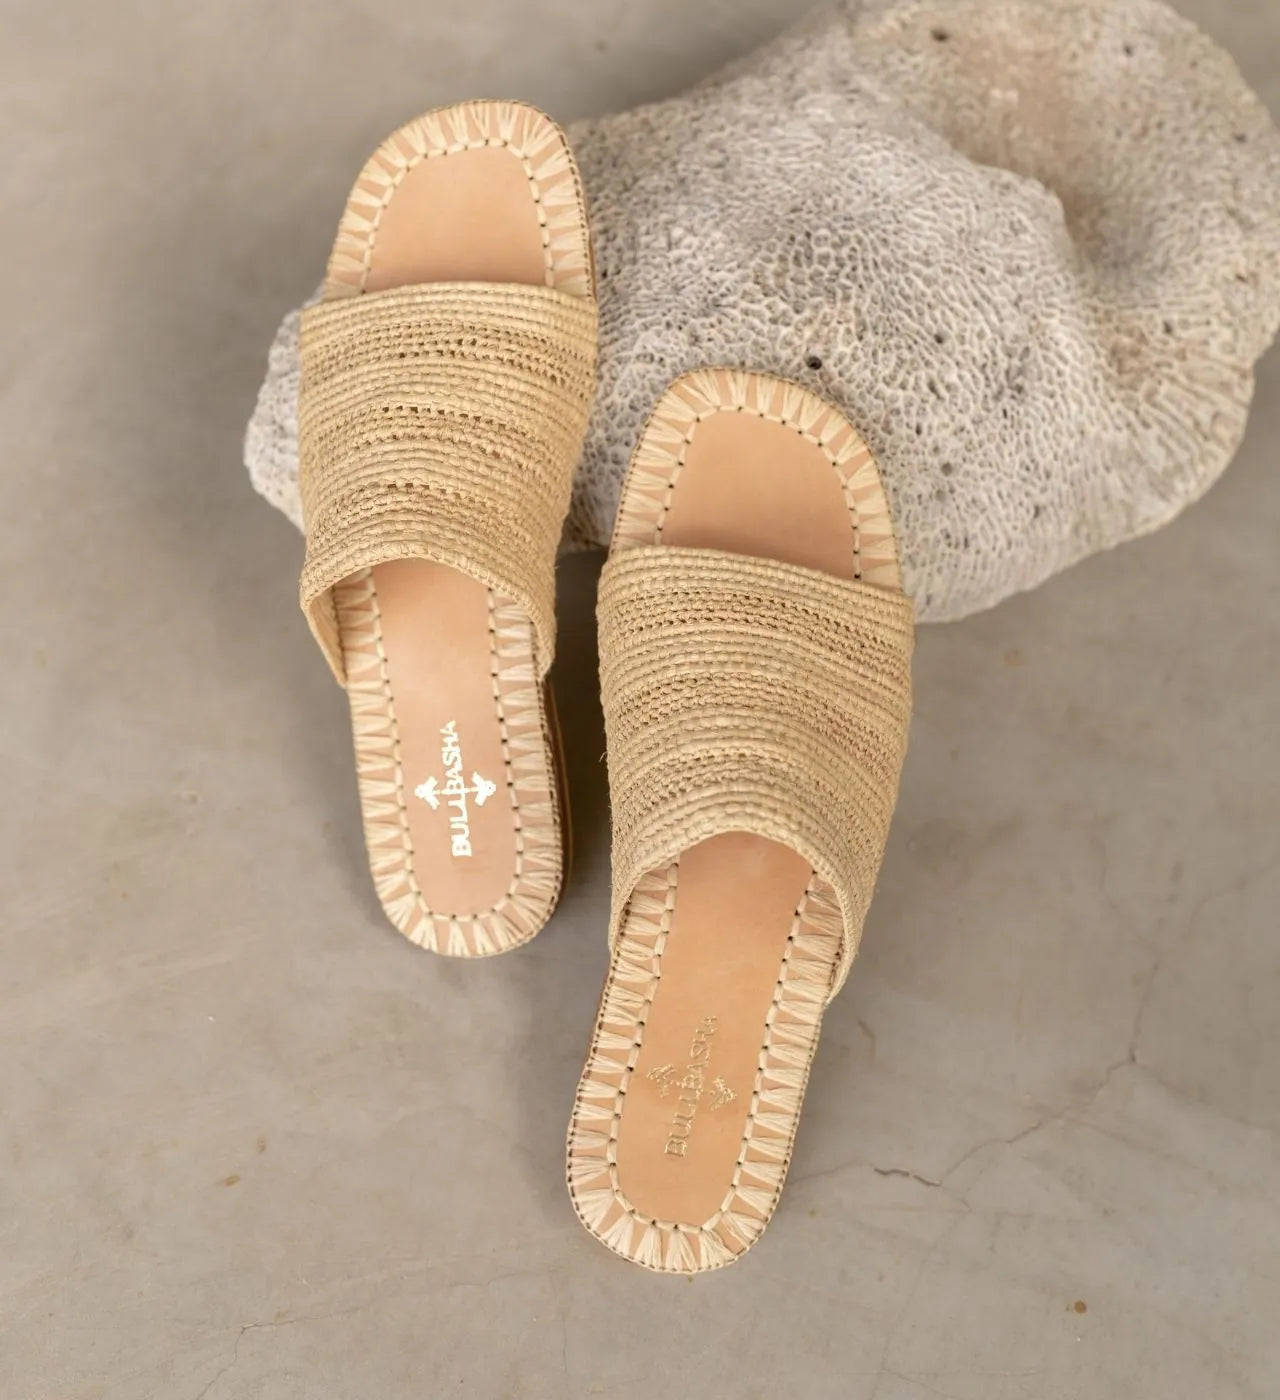 Anir, sustainable, handmade sandals made from natural materials by Bulibasha